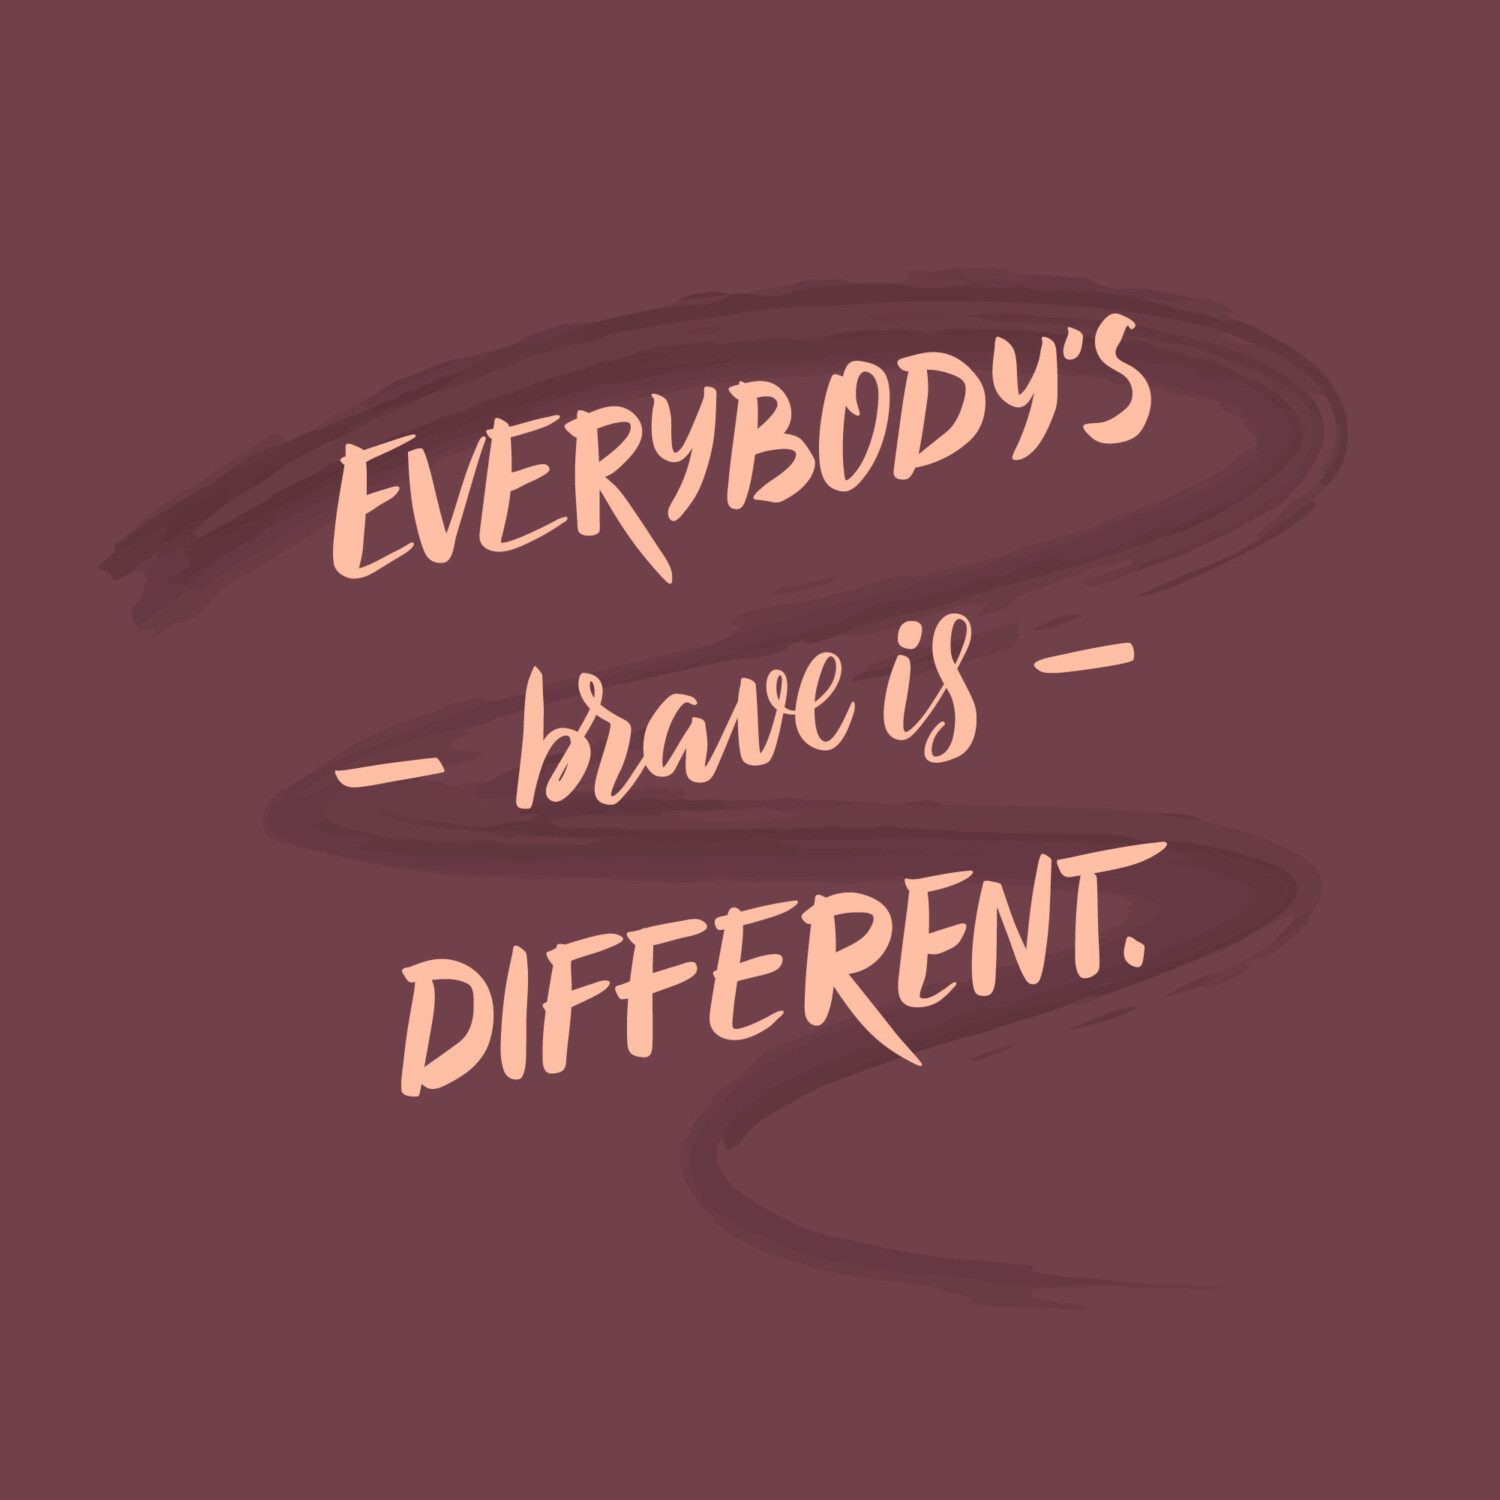 Everybody's brave is different.